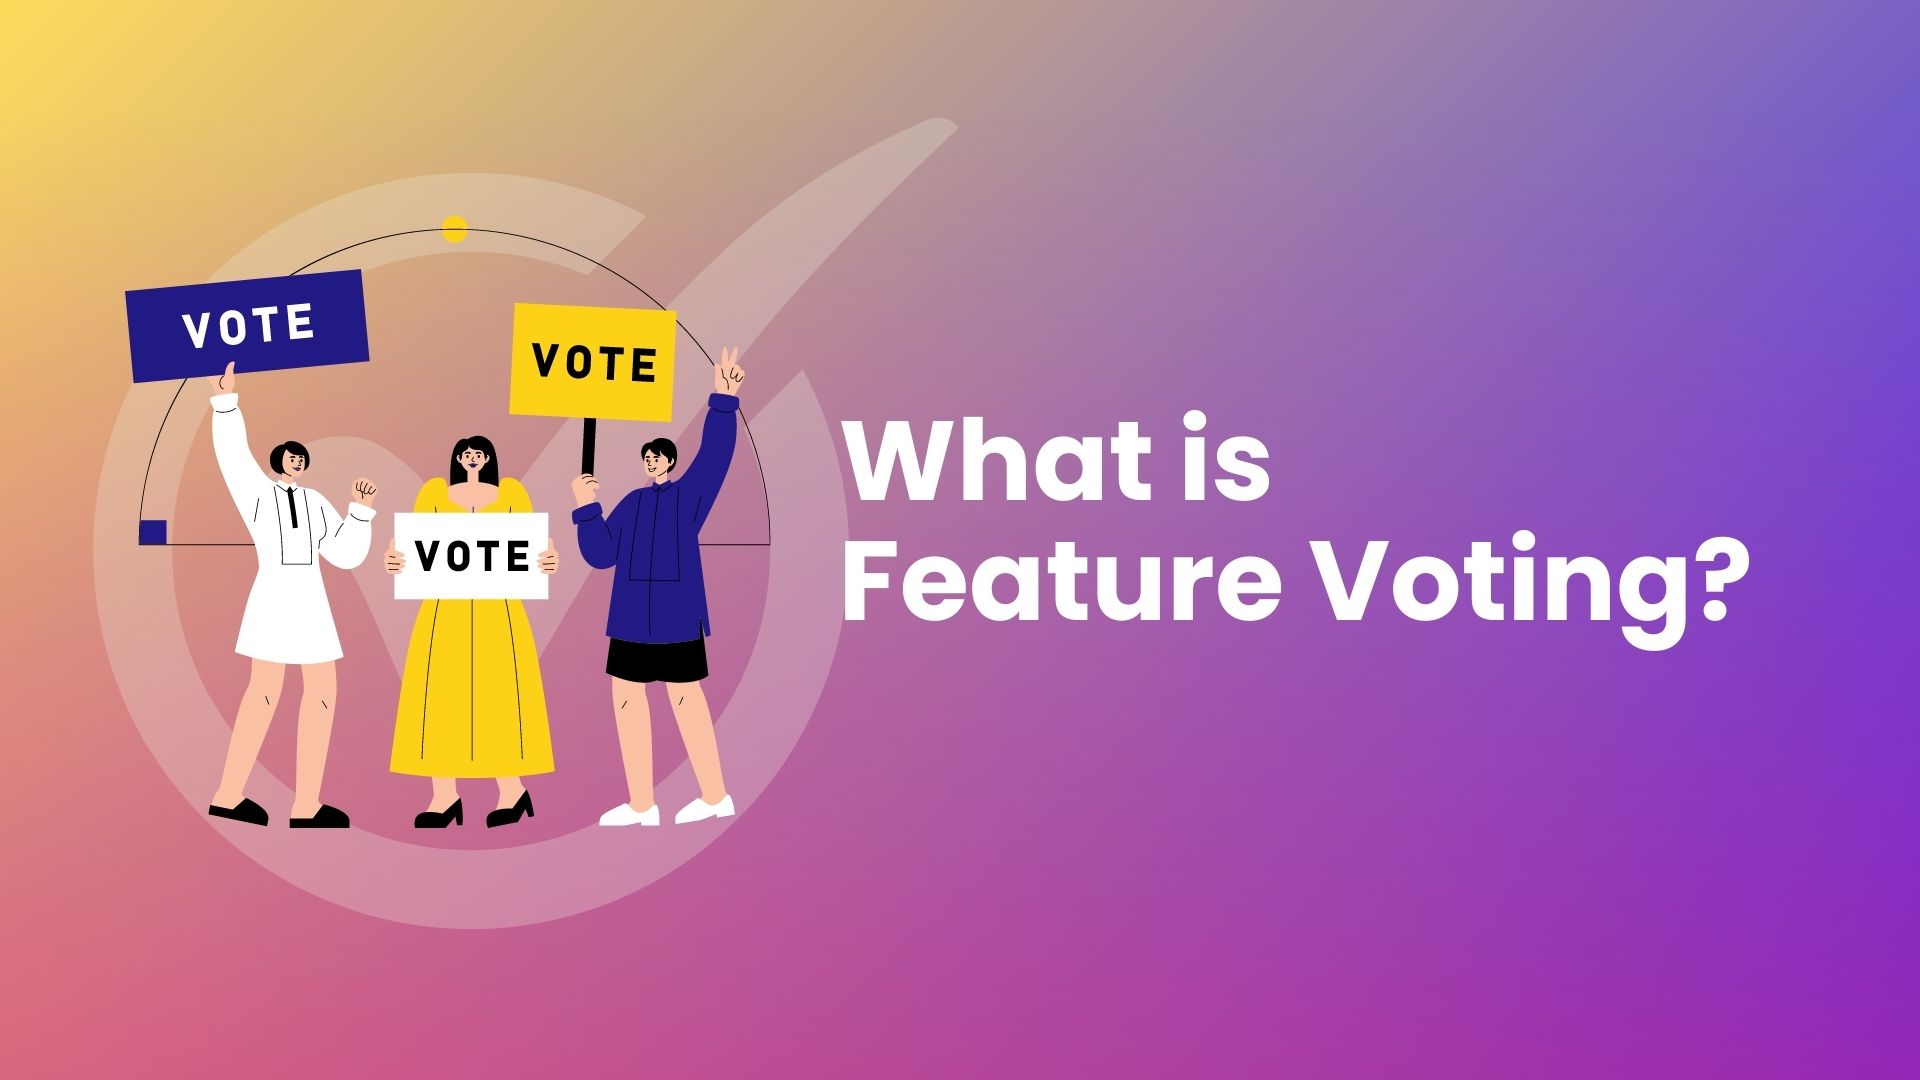 What is Feature Voting?